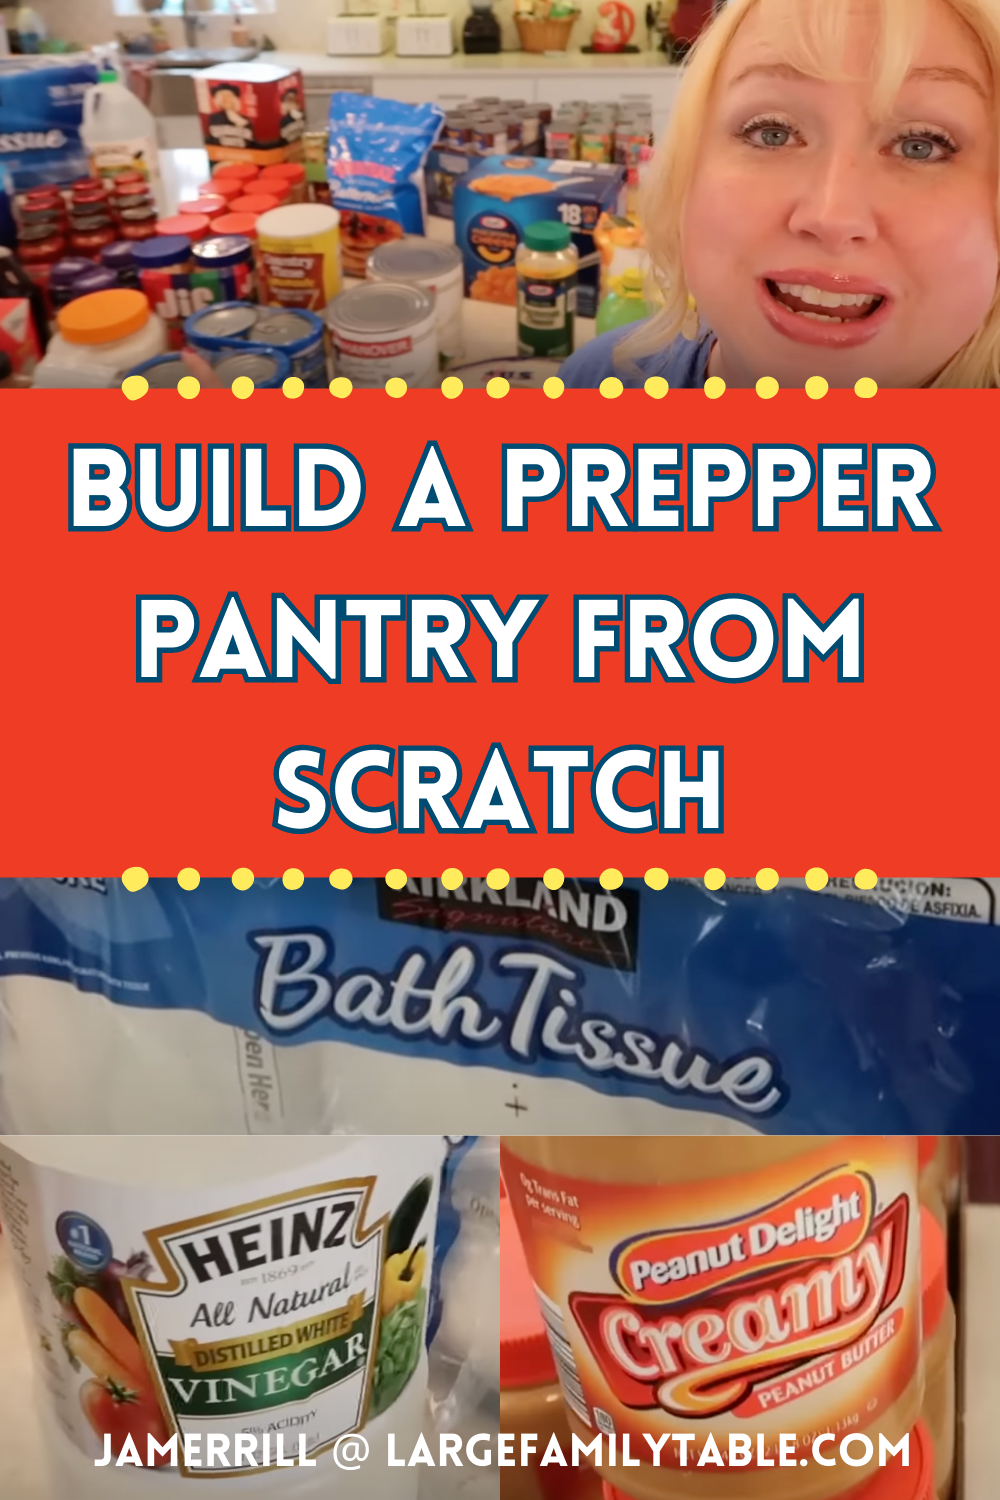 Build a Prepper Pantry from Scratch